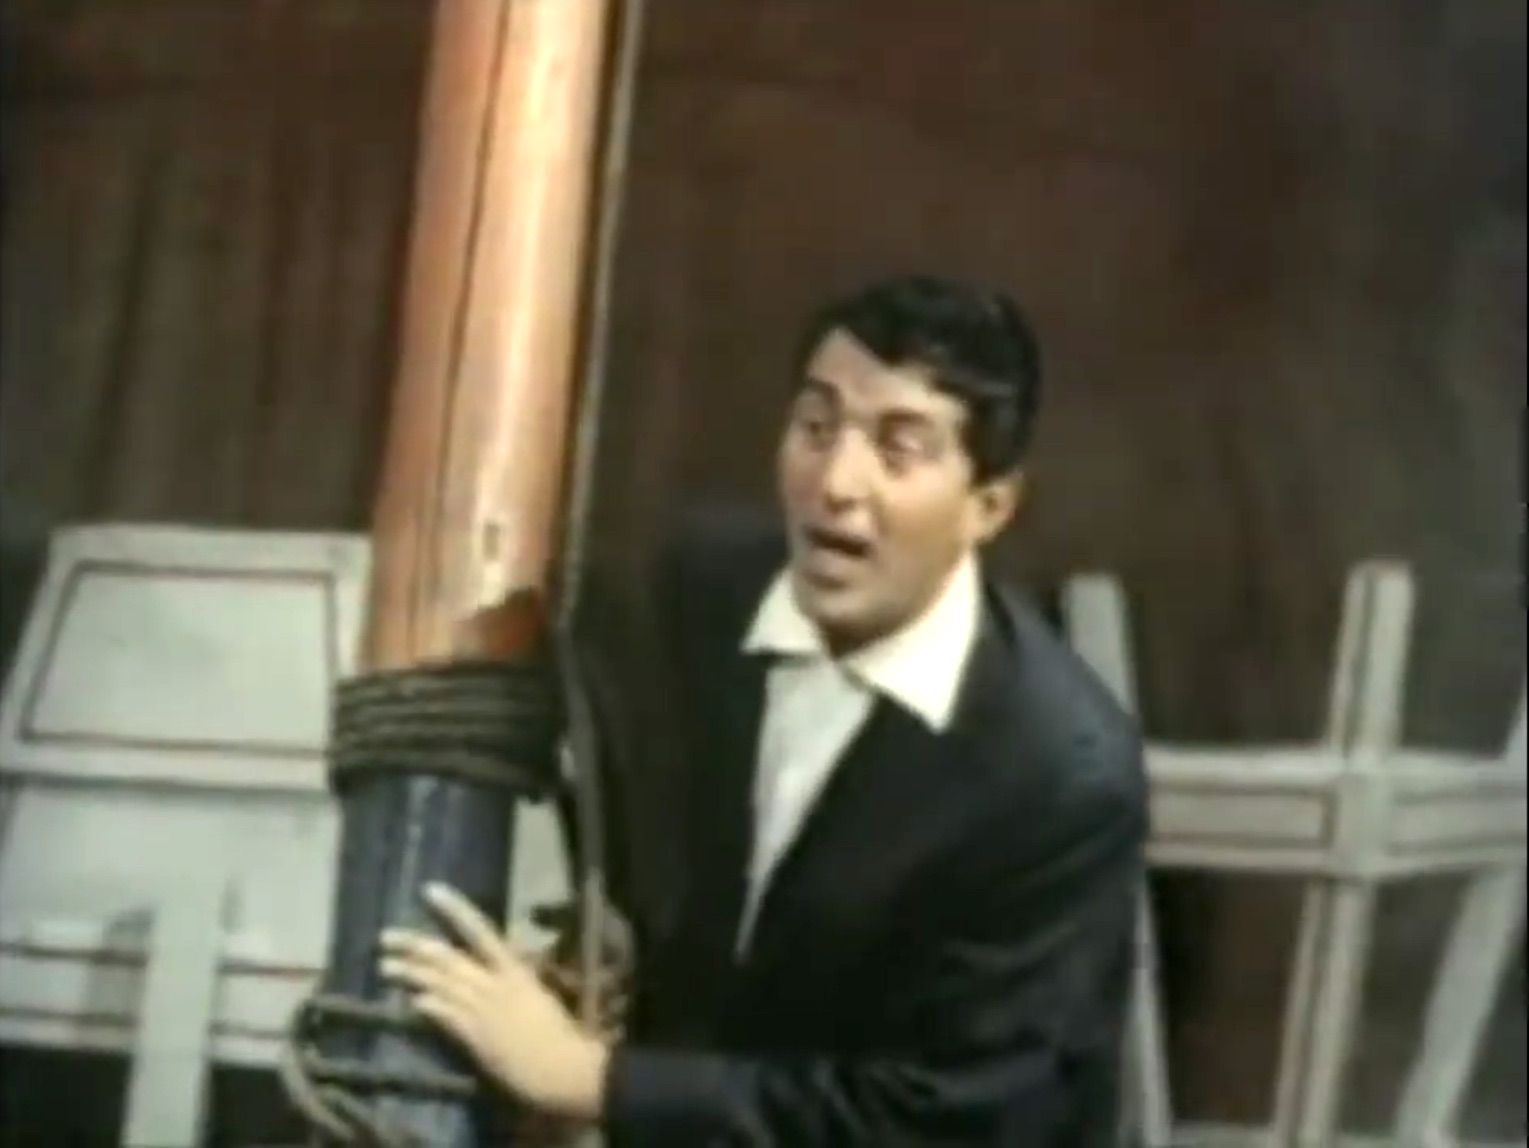 Song lyrics to It's a Big Wide Wonderful World, Written by John Rox, Performed by Dean Martin in 3 Ring Circus